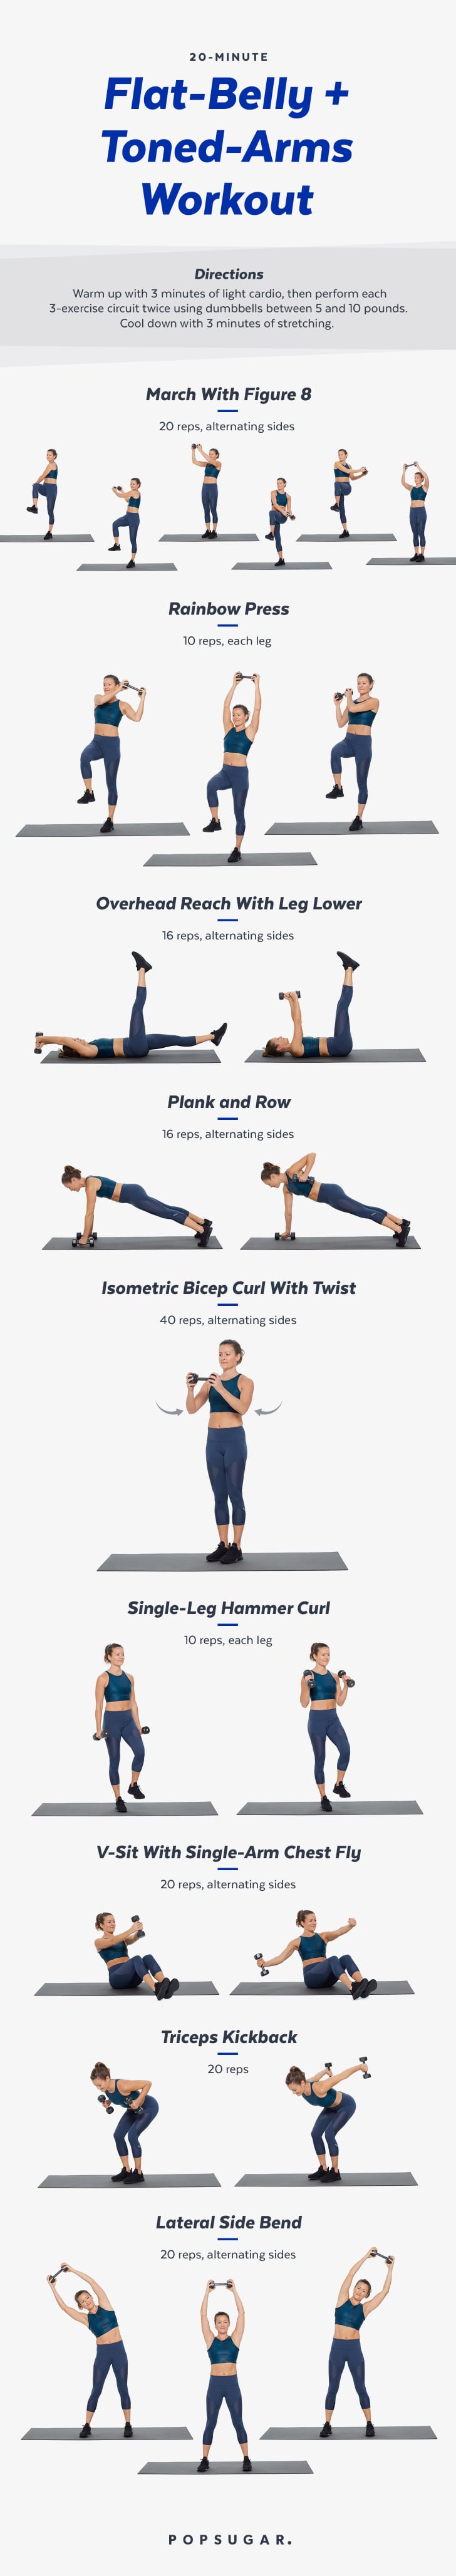 Add Some Weights to Your Arms and Abs Workout | Printable ...